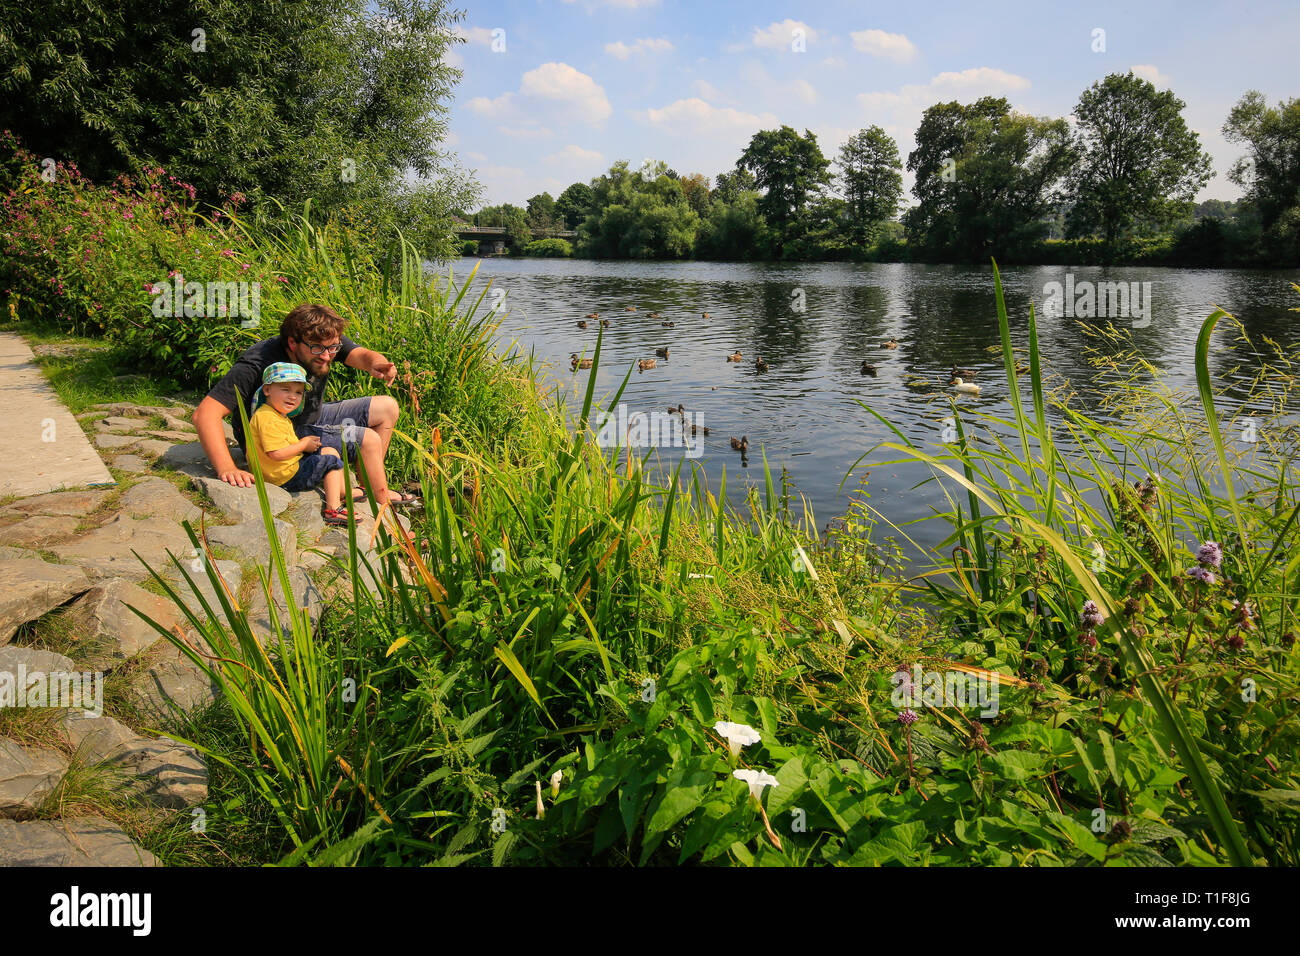 19.08.2016, Essen, North Rhine-Westphalia, Germany - Ruhrpromenade in the district of Steele, father and son sit on the banks of the Ruhr and feed duc Stock Photo